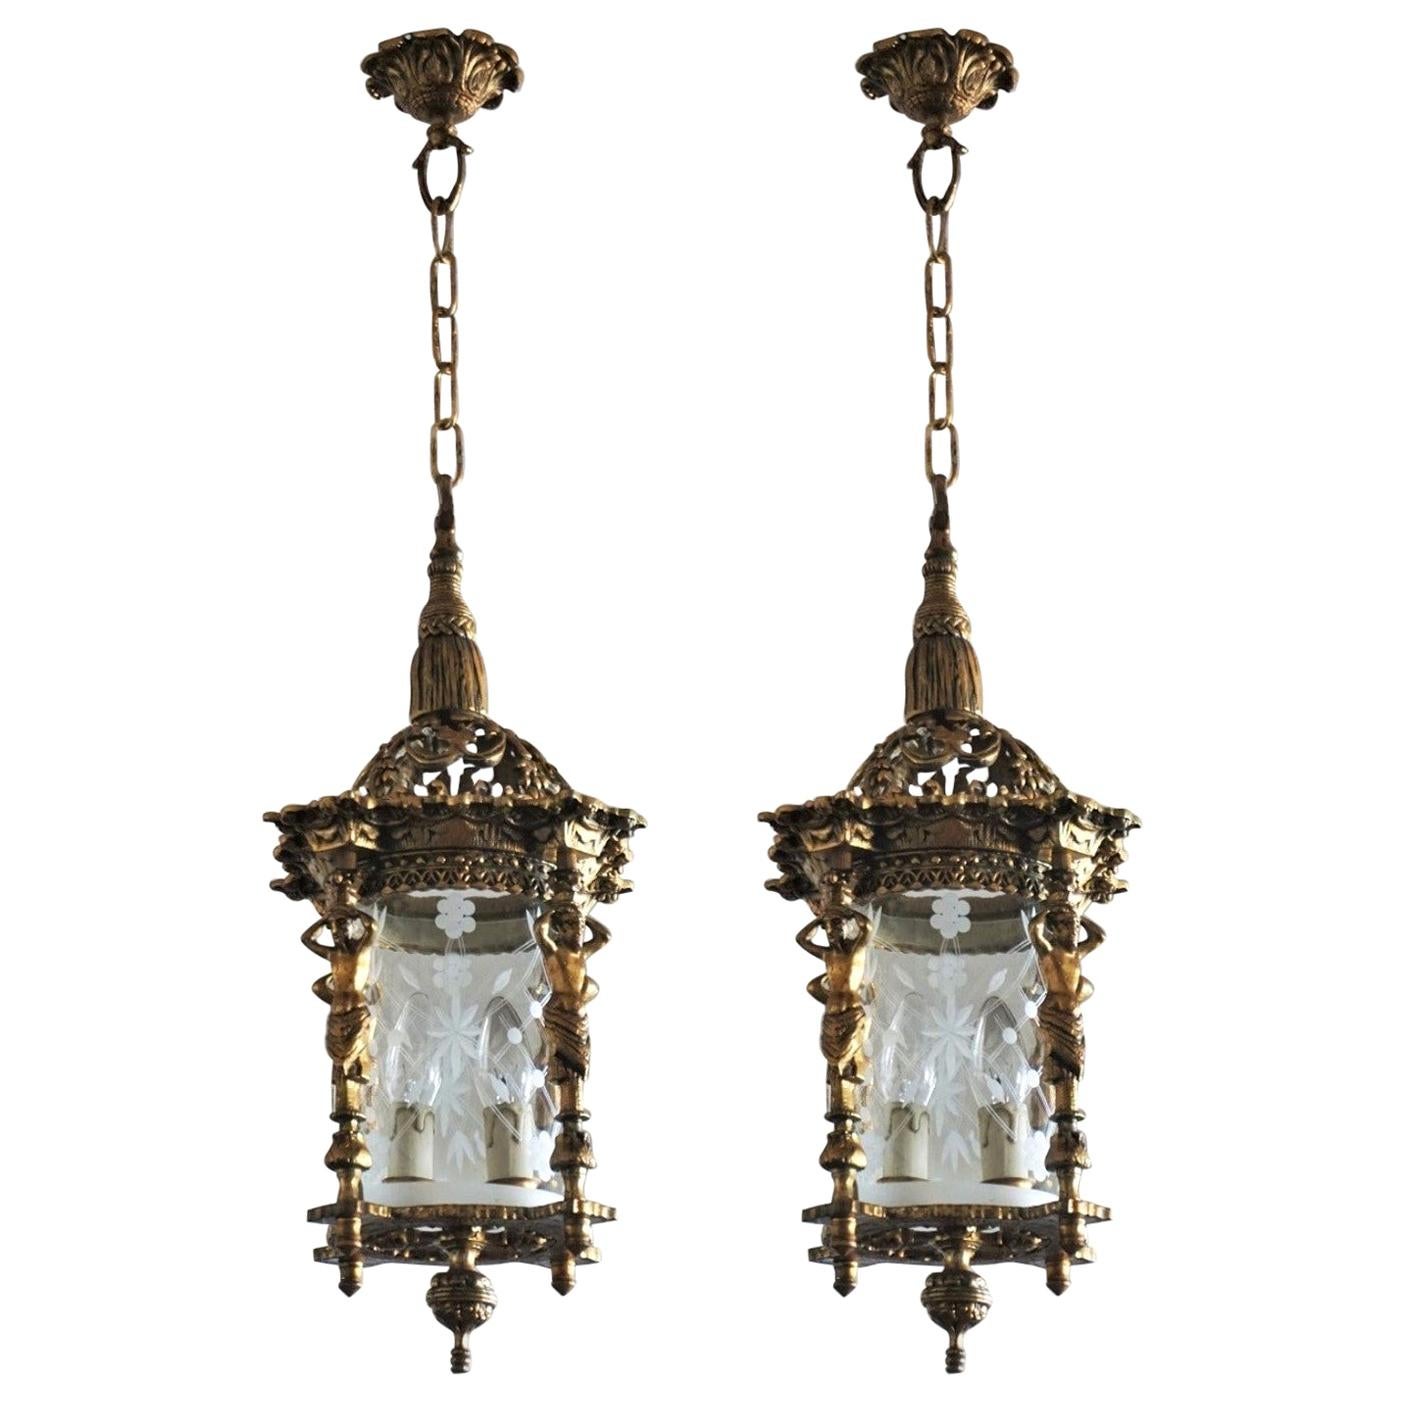 Pair of French Empire Style Gilt Bronze Cut Glass Two-Light Lanterns Chandeliers